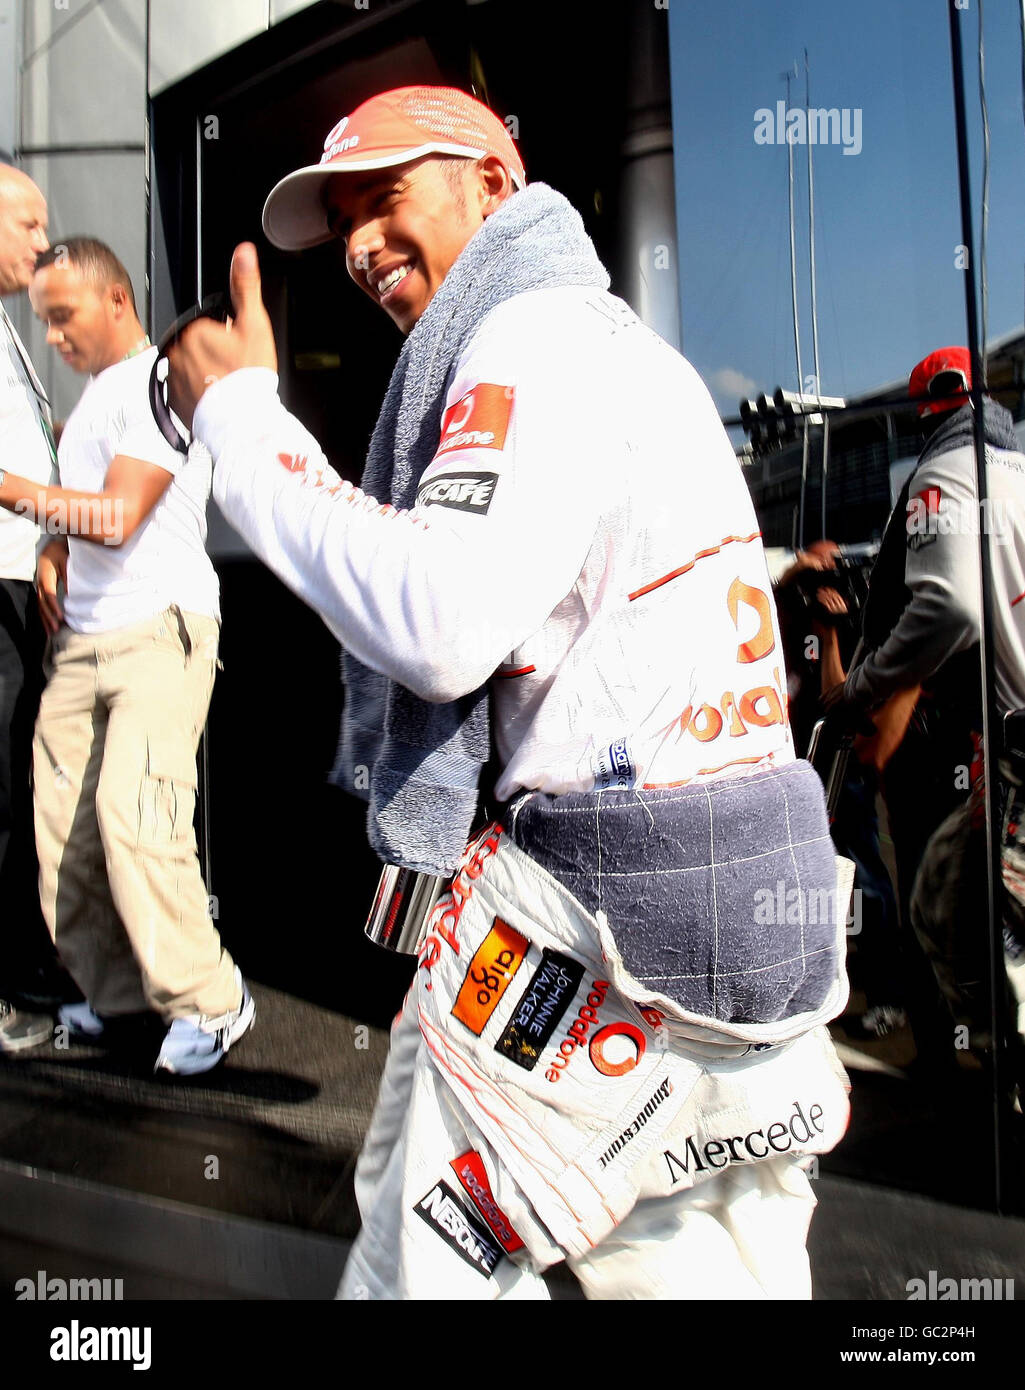 Vodafone McLaren driver Lewis Hamilton makes his way back to the McLaren motorhome after his last lap crash during the Italian Grand prix at the Monza Circuit, Italy. Stock Photo